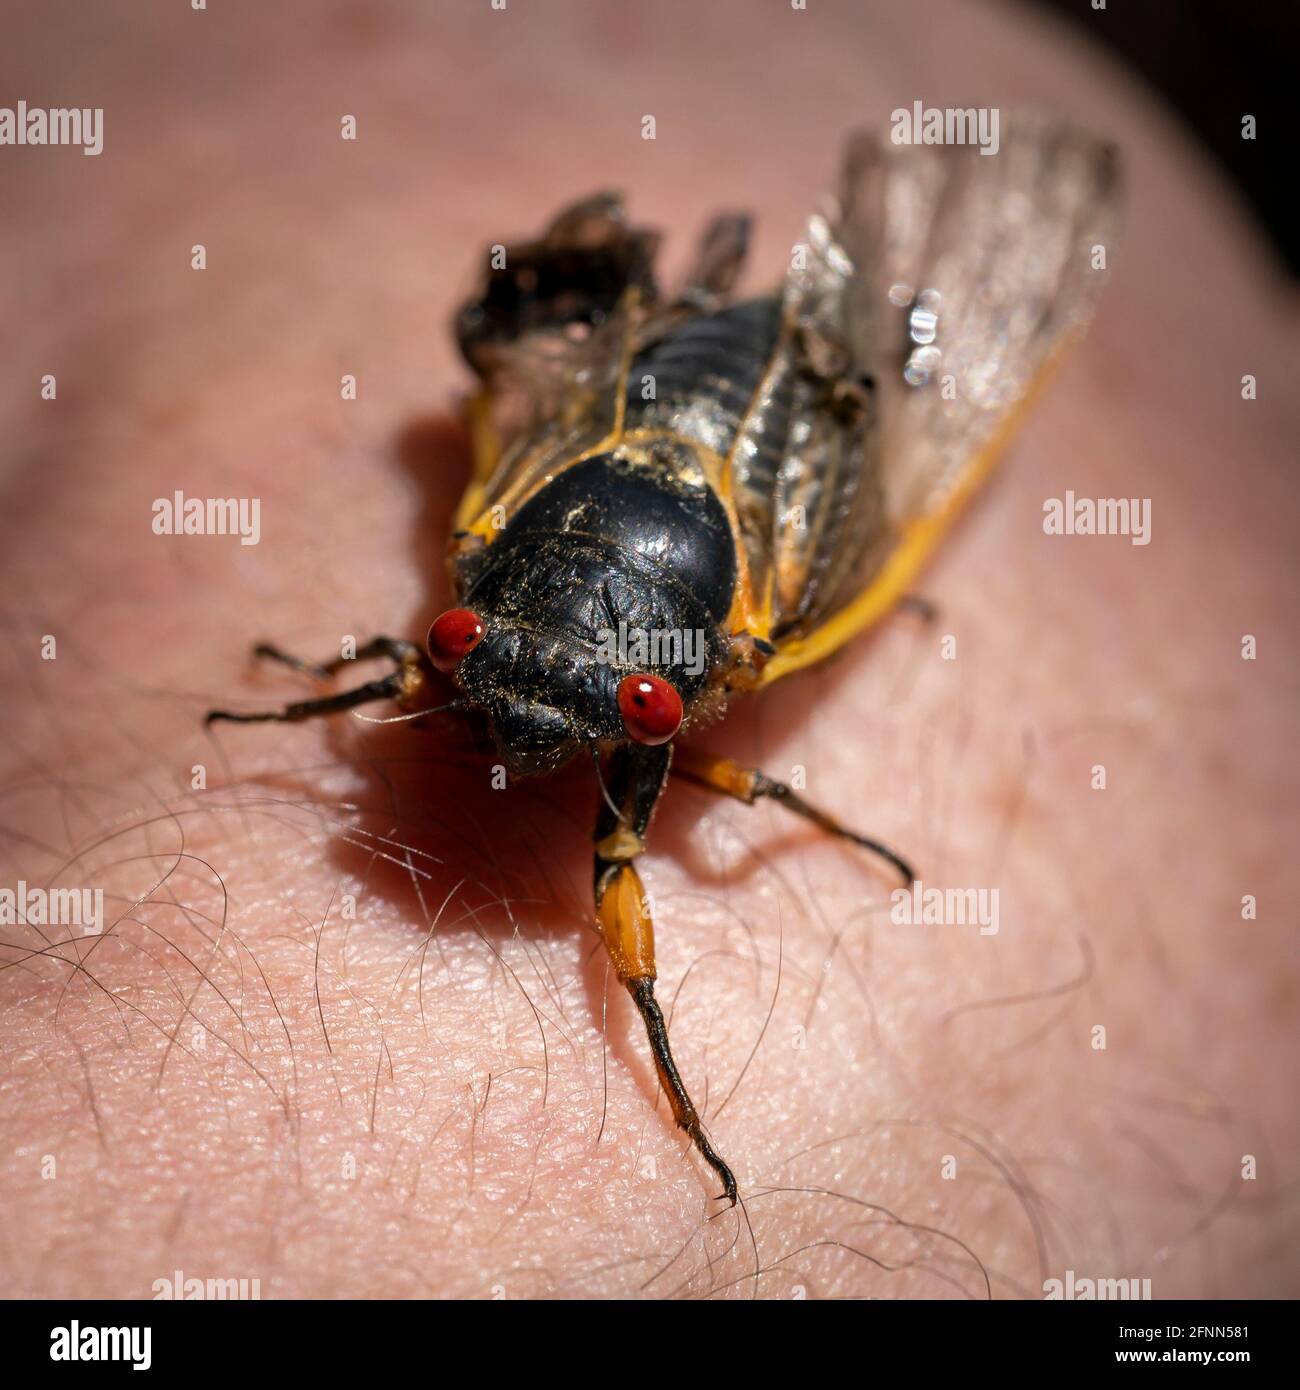 A large 17-year Brood X cicada with striking red eyes and clear fragile wings clings to a human arm. Stock Photo